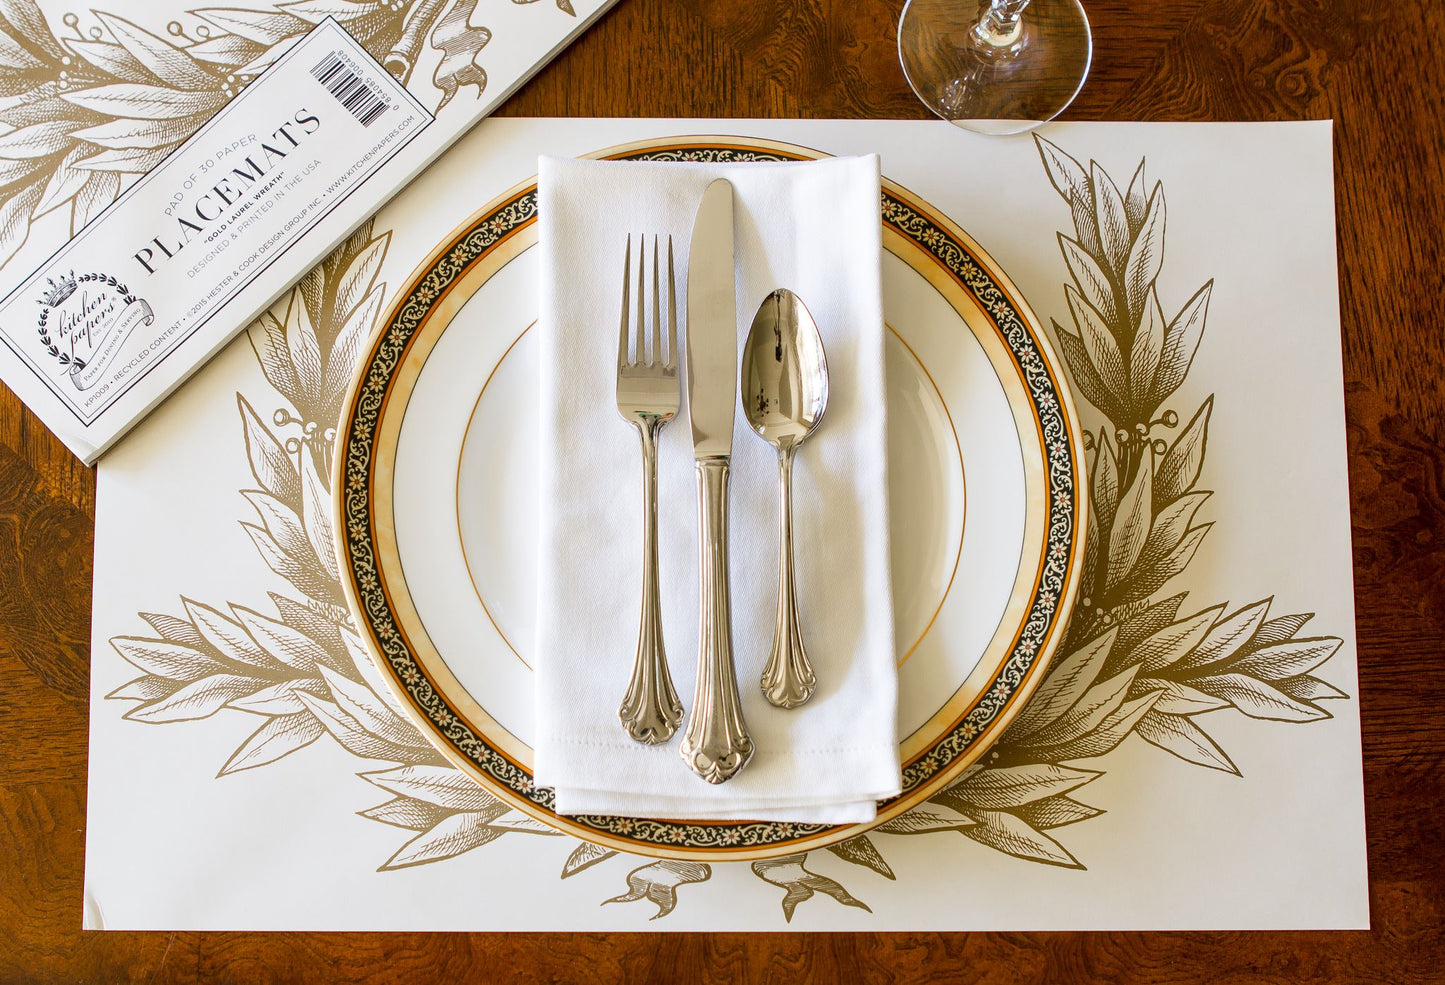 A beautiful place setting using the gold laurel paper placemats with an elegant plate,napkin and silverware.